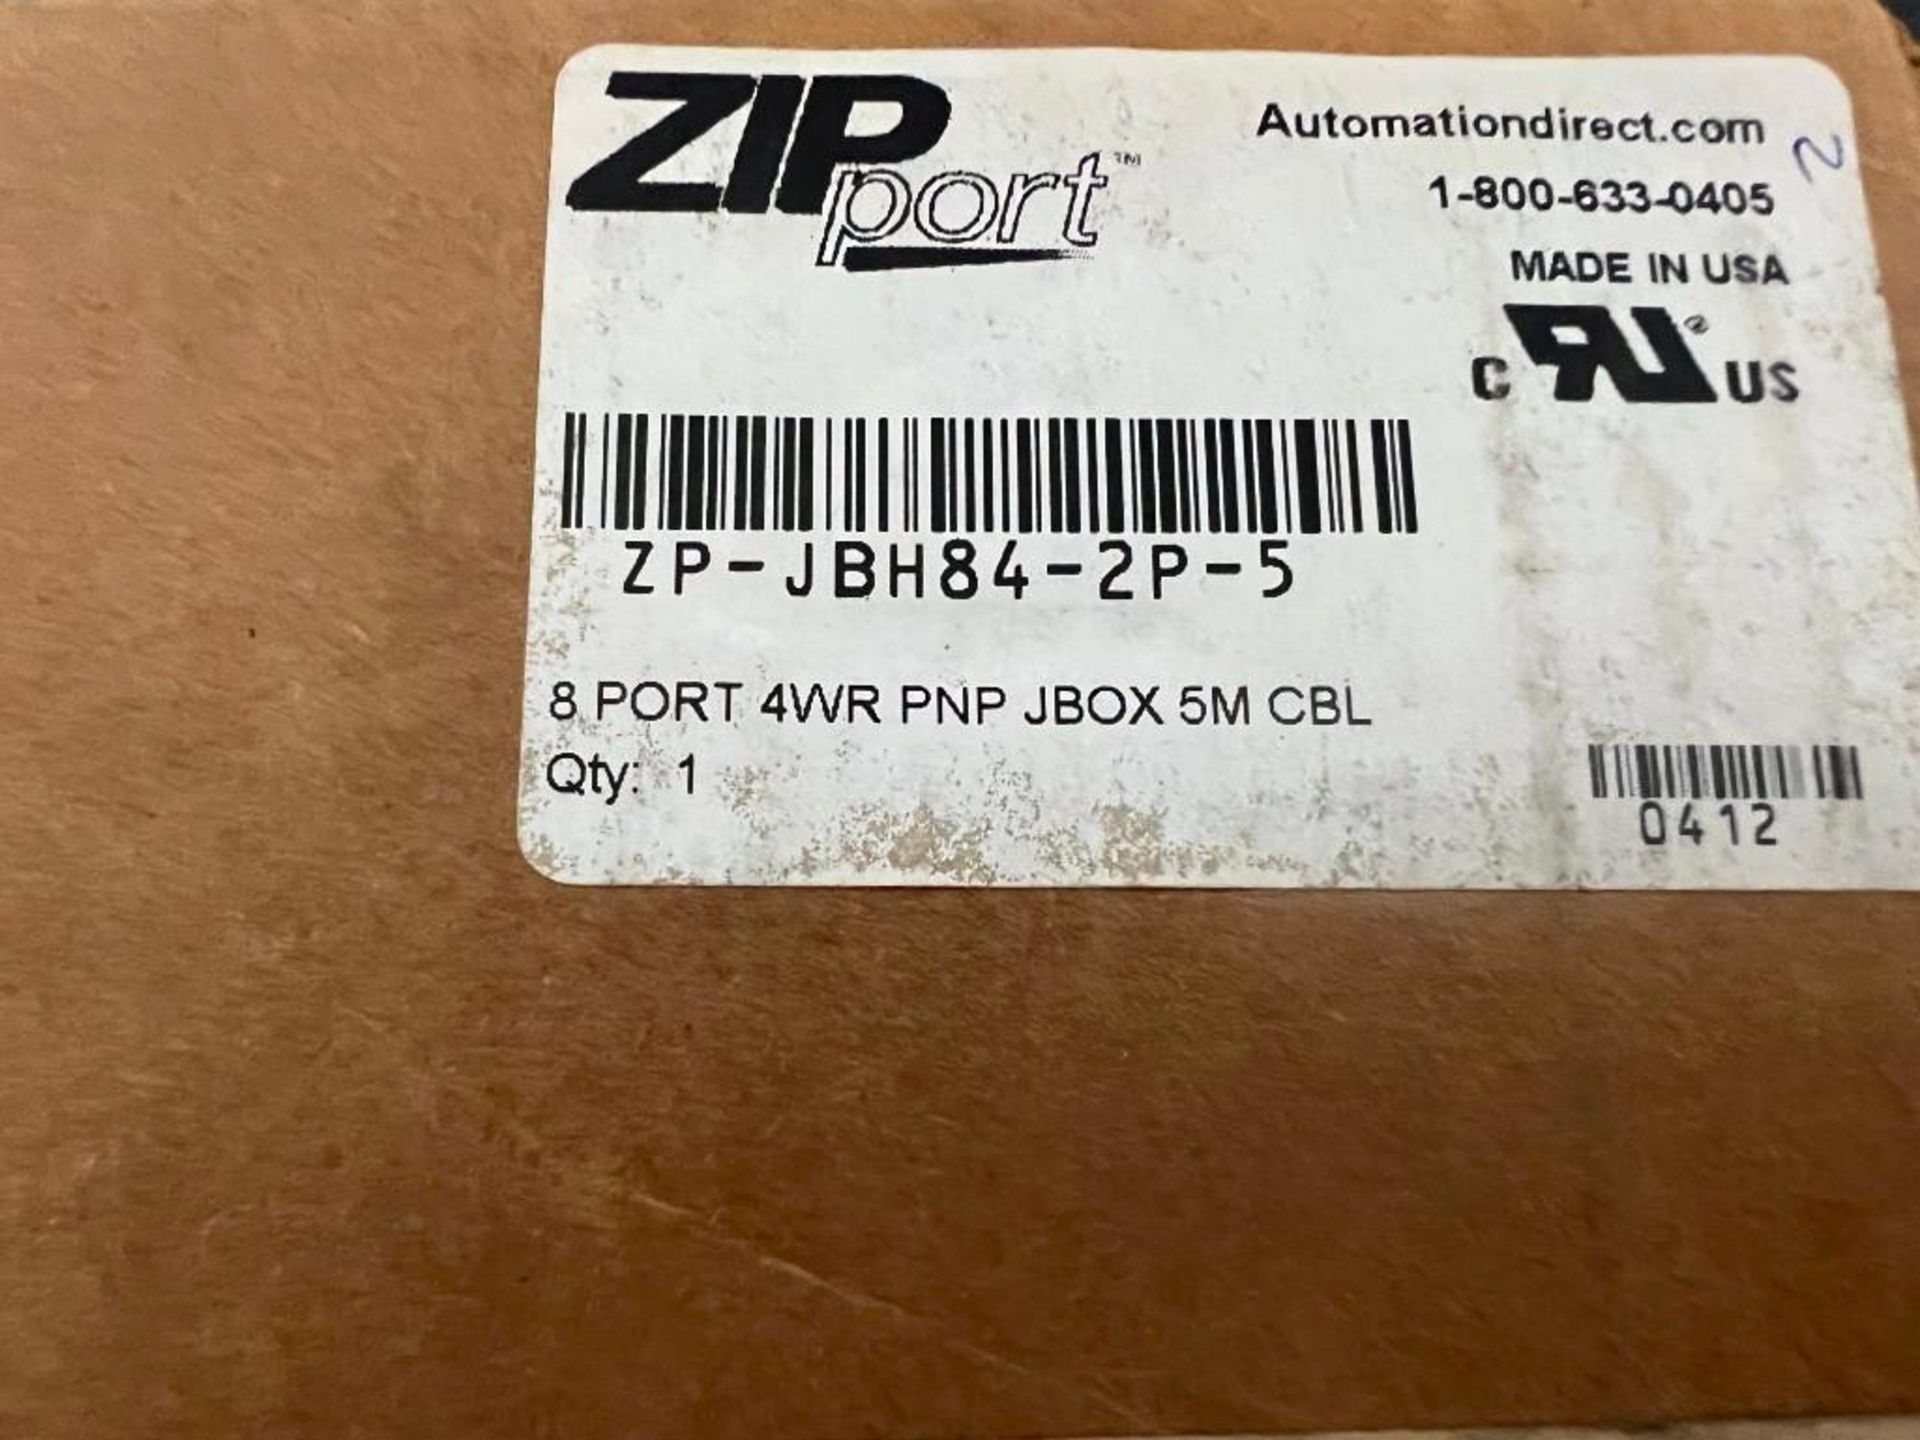 AUTOMATION DIRECT ZP-JBH84-2P-5 - Image 3 of 3